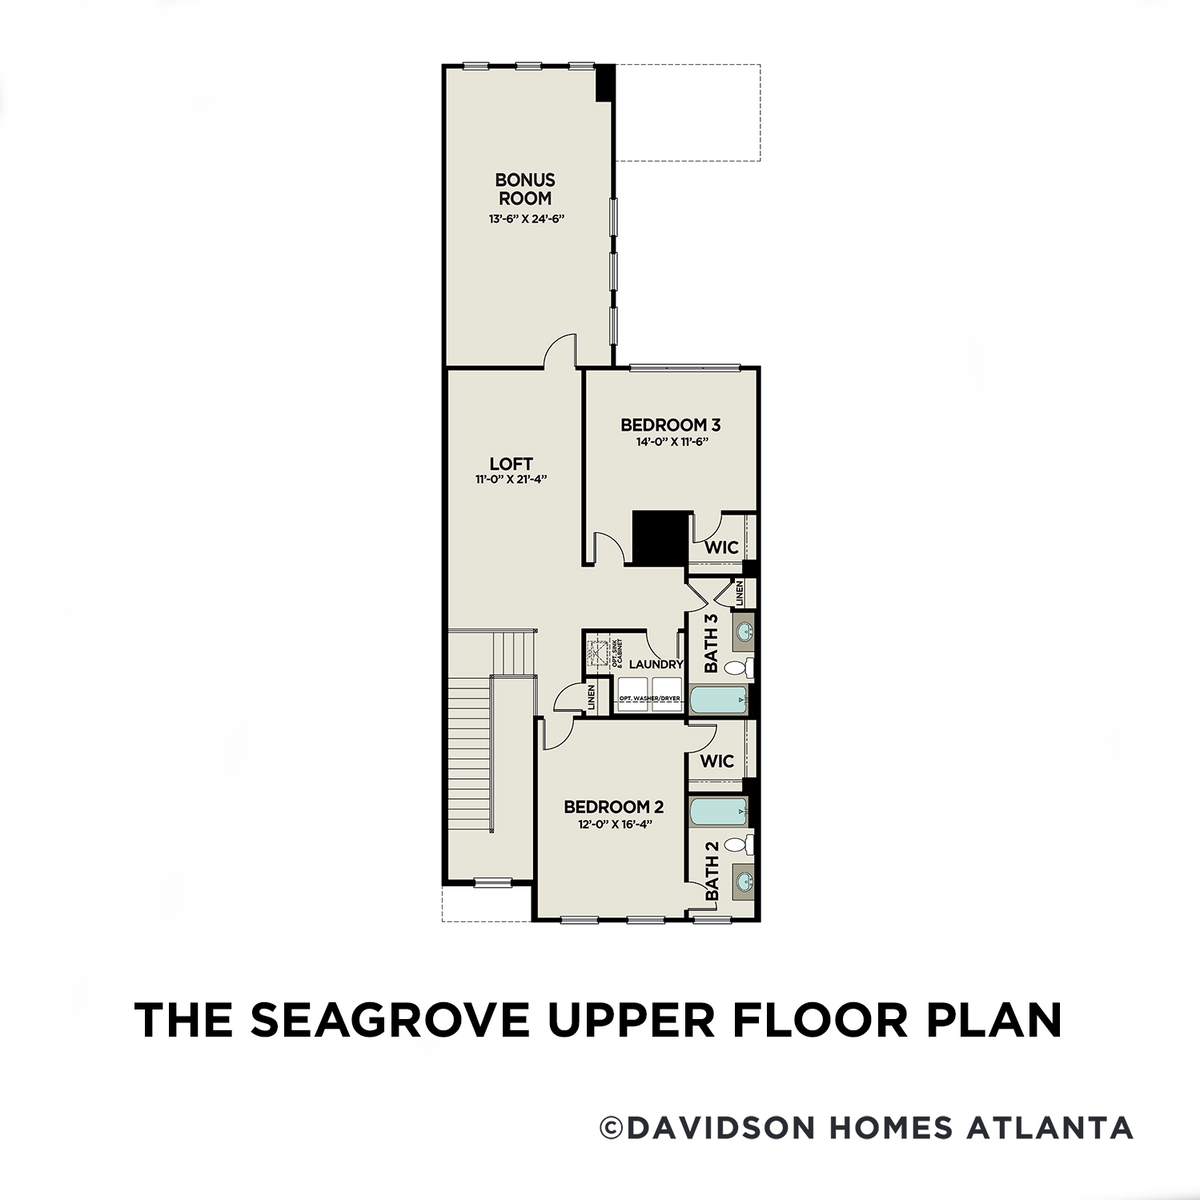 2 - The Seagrove A floor plan layout for 406 Falling Water Avenue in Davidson Homes' The Village at Towne Lake community.